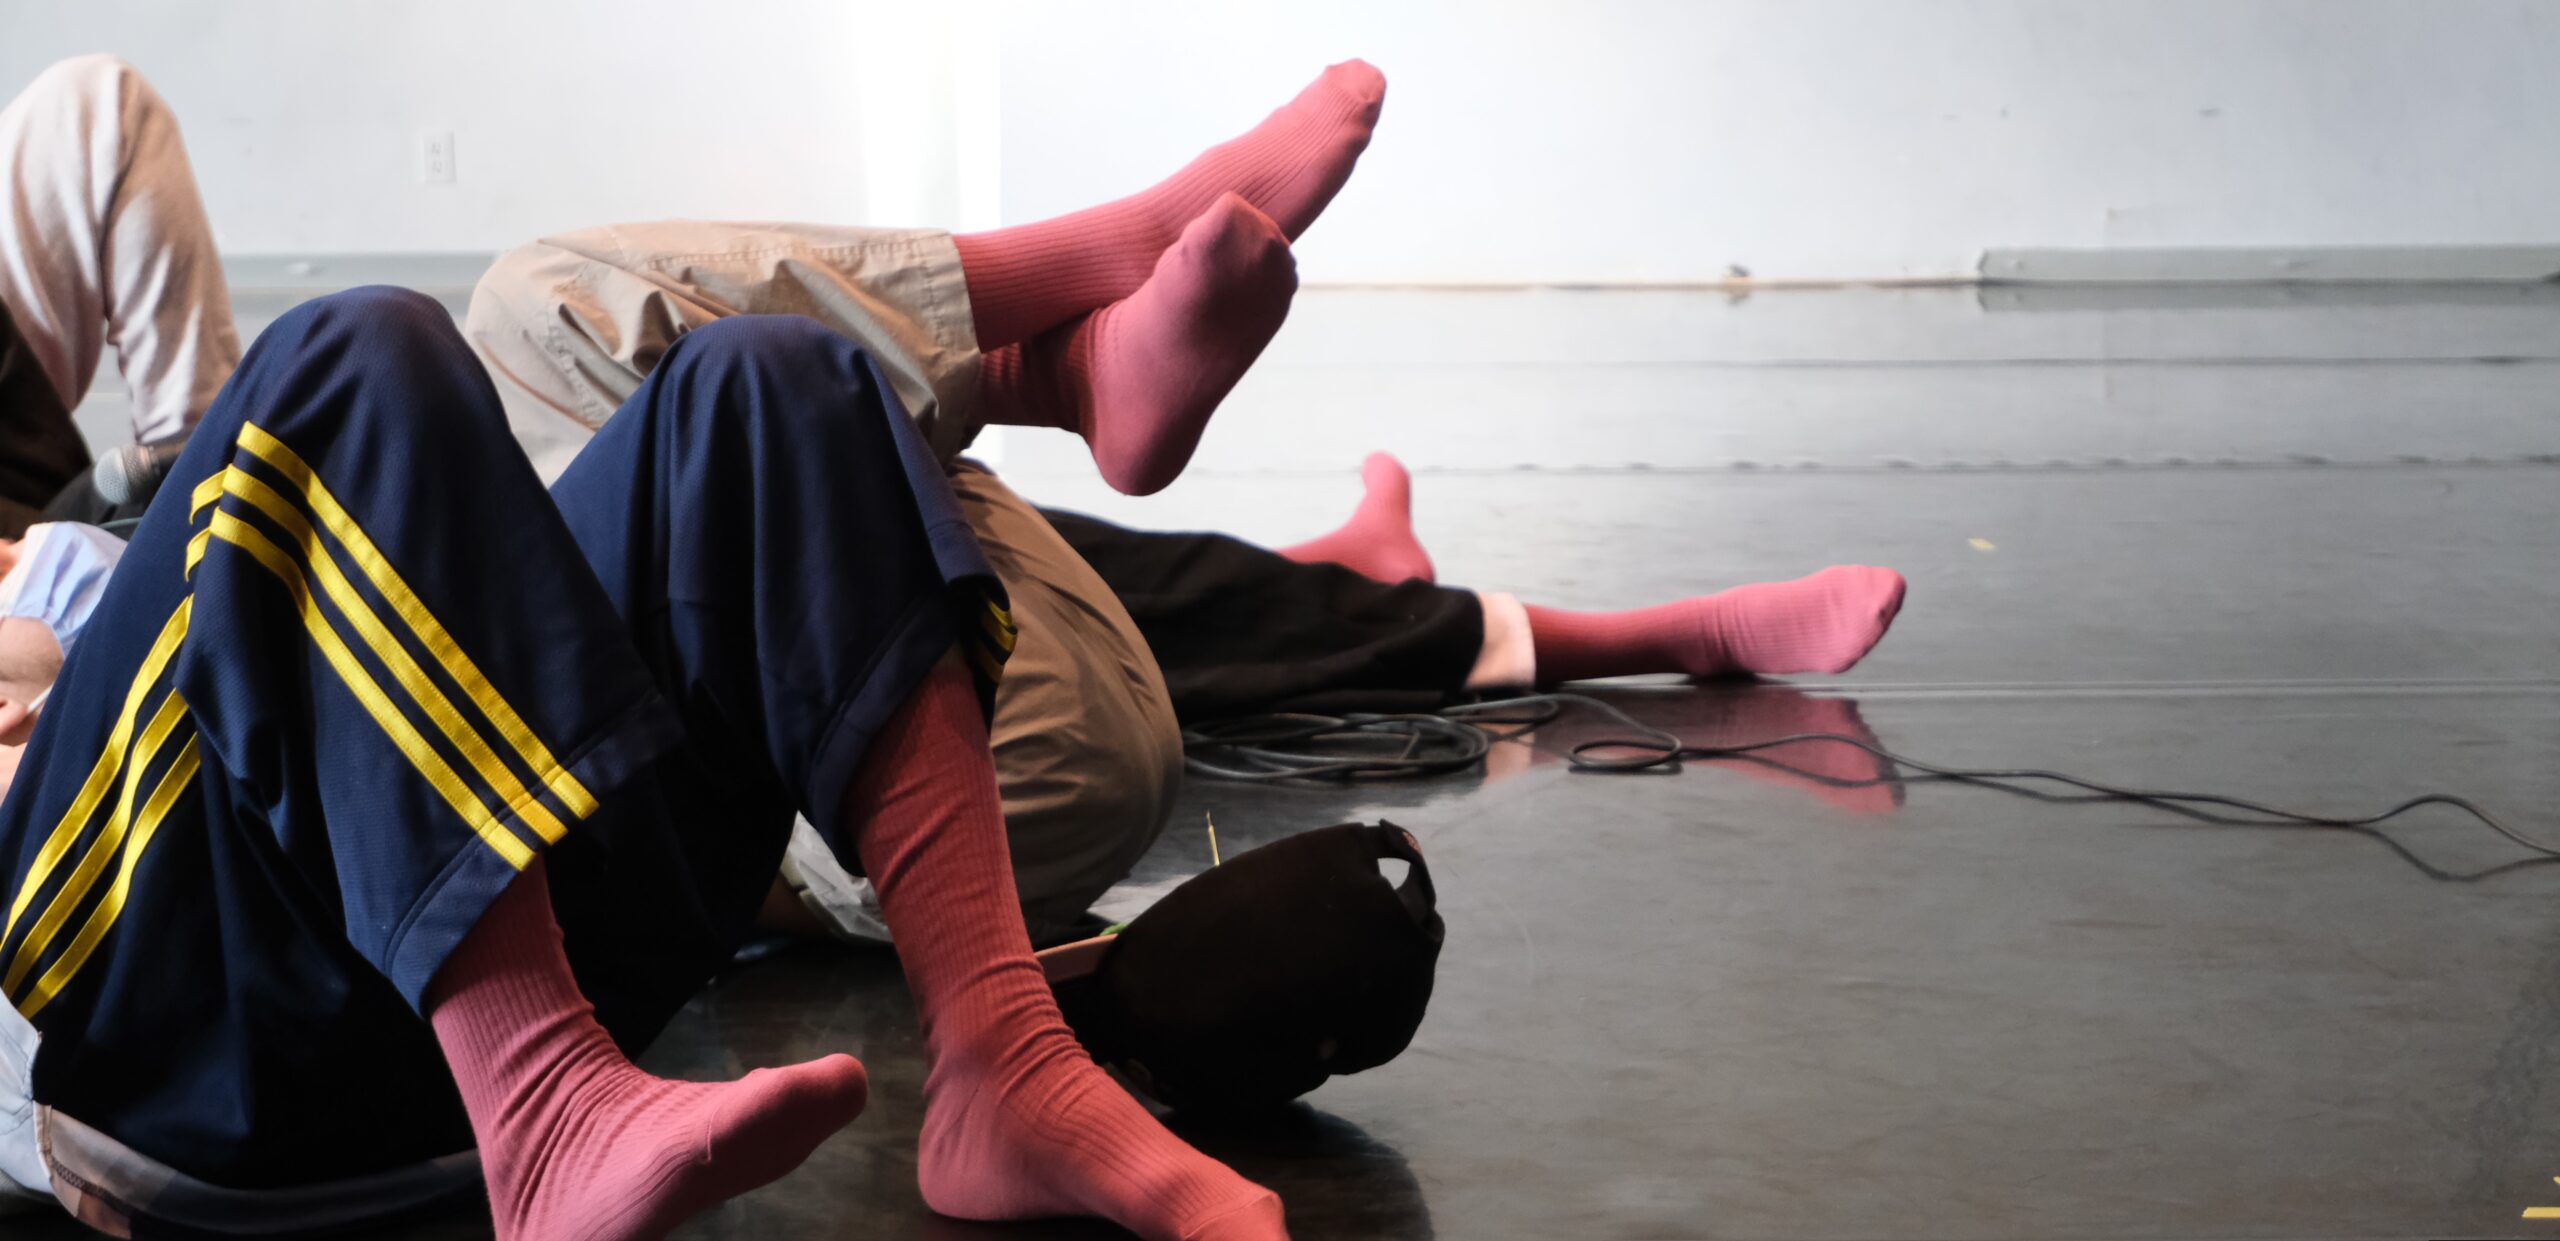 Dancers legs on the floor with colourful pink socks